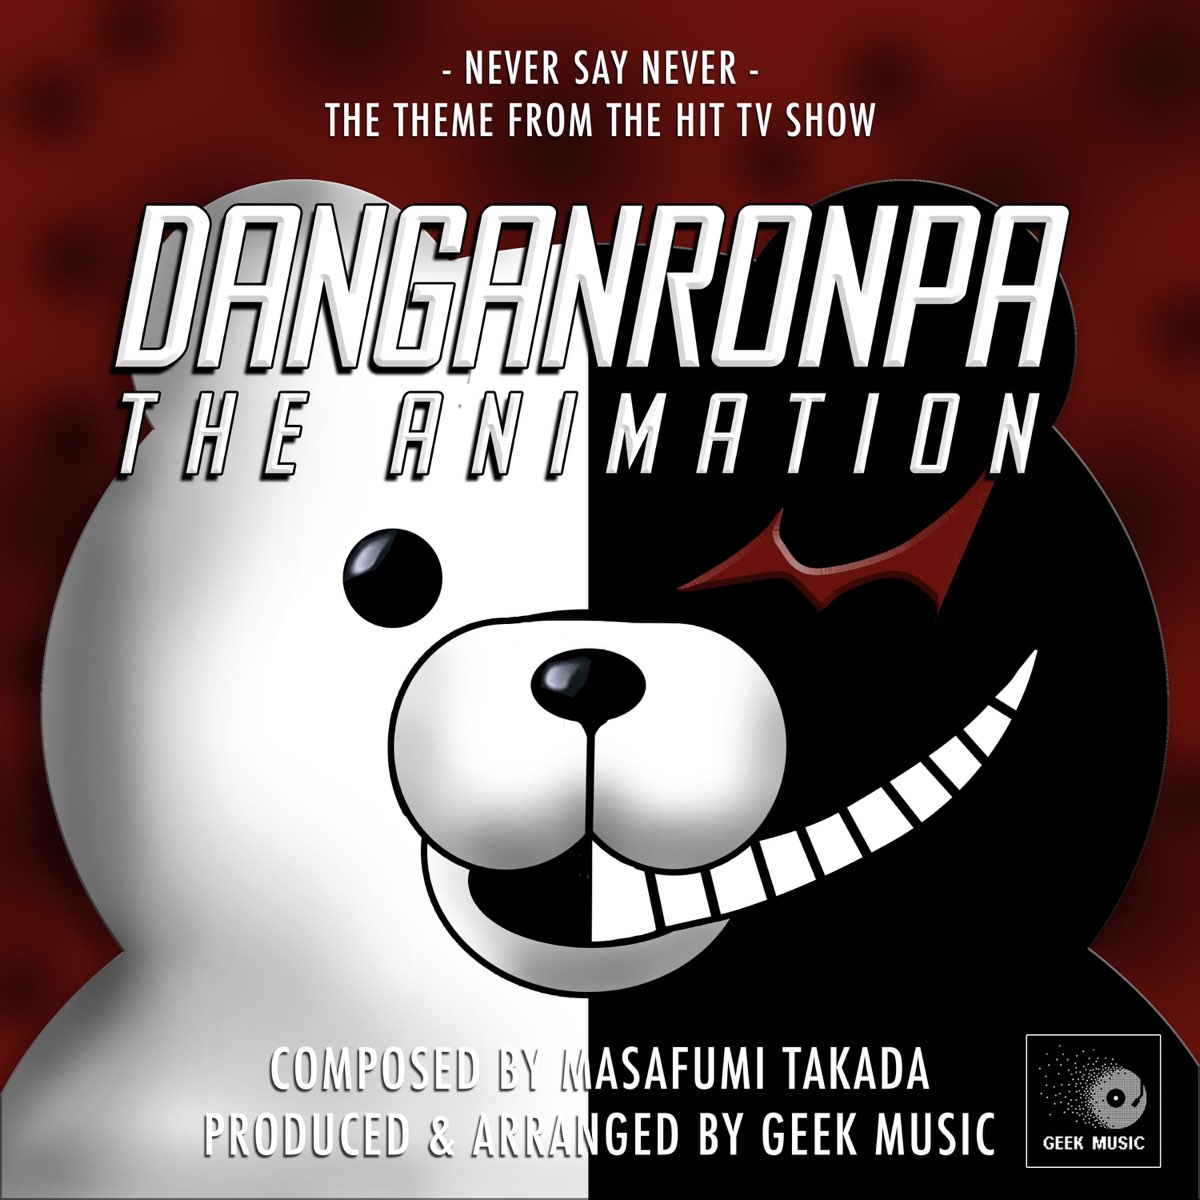 Never Say Never From Danganronpa The Animation Single By Geek Music On Apple Music